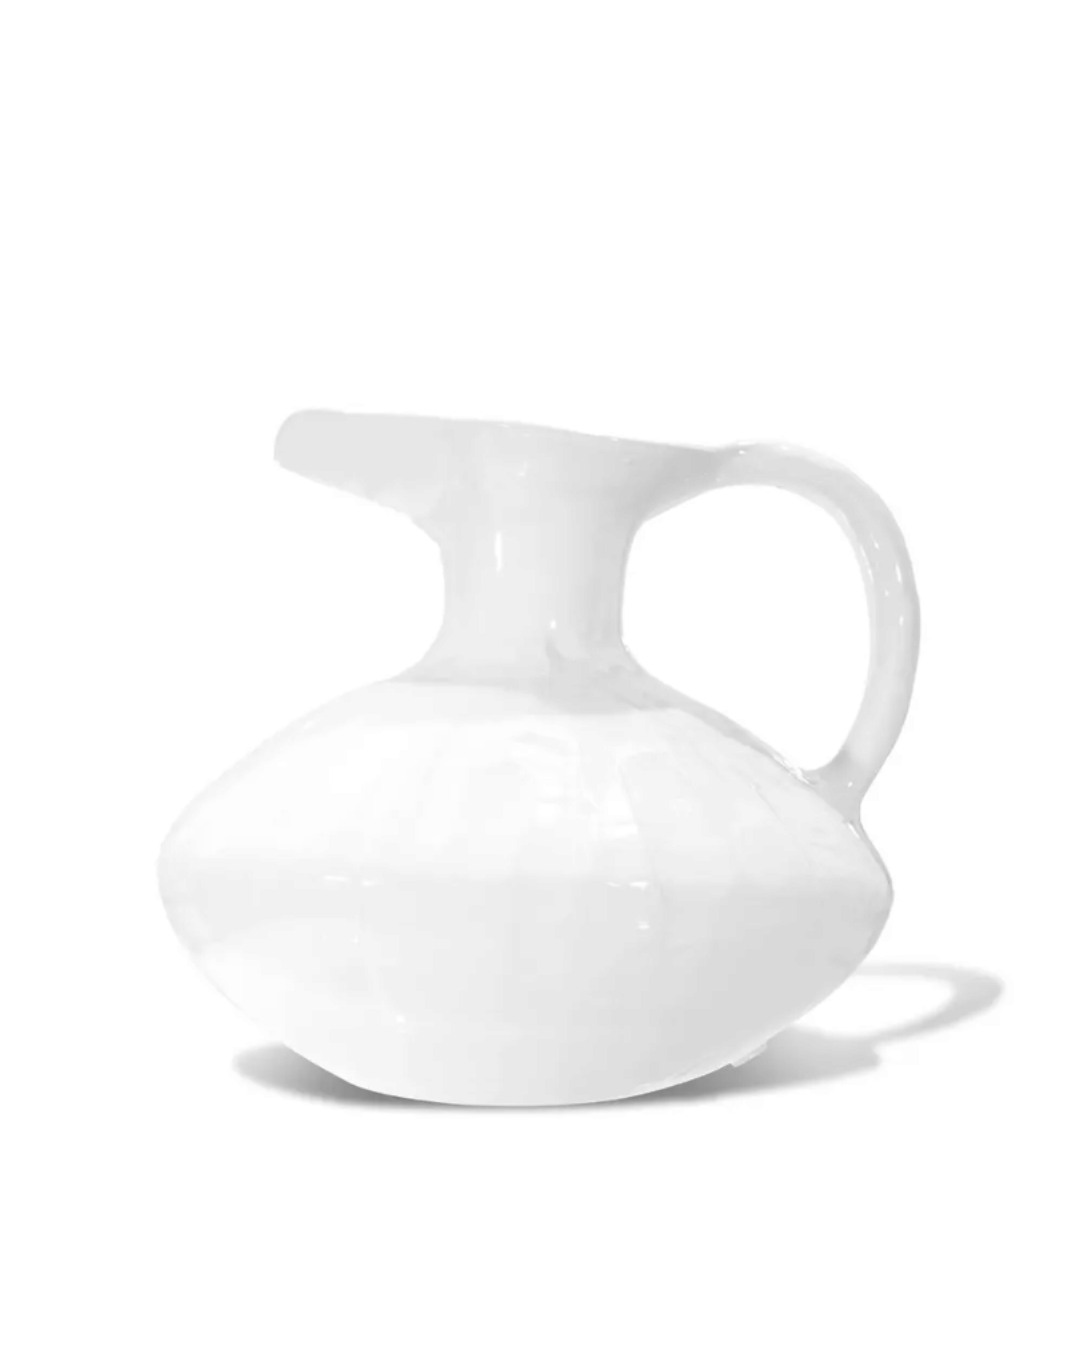 A simple white ceramic Montes Doggett Pitcher No. 431 with a round body and an elegant handle, set against a plain white background in a Scottsdale, Arizona bungalow.